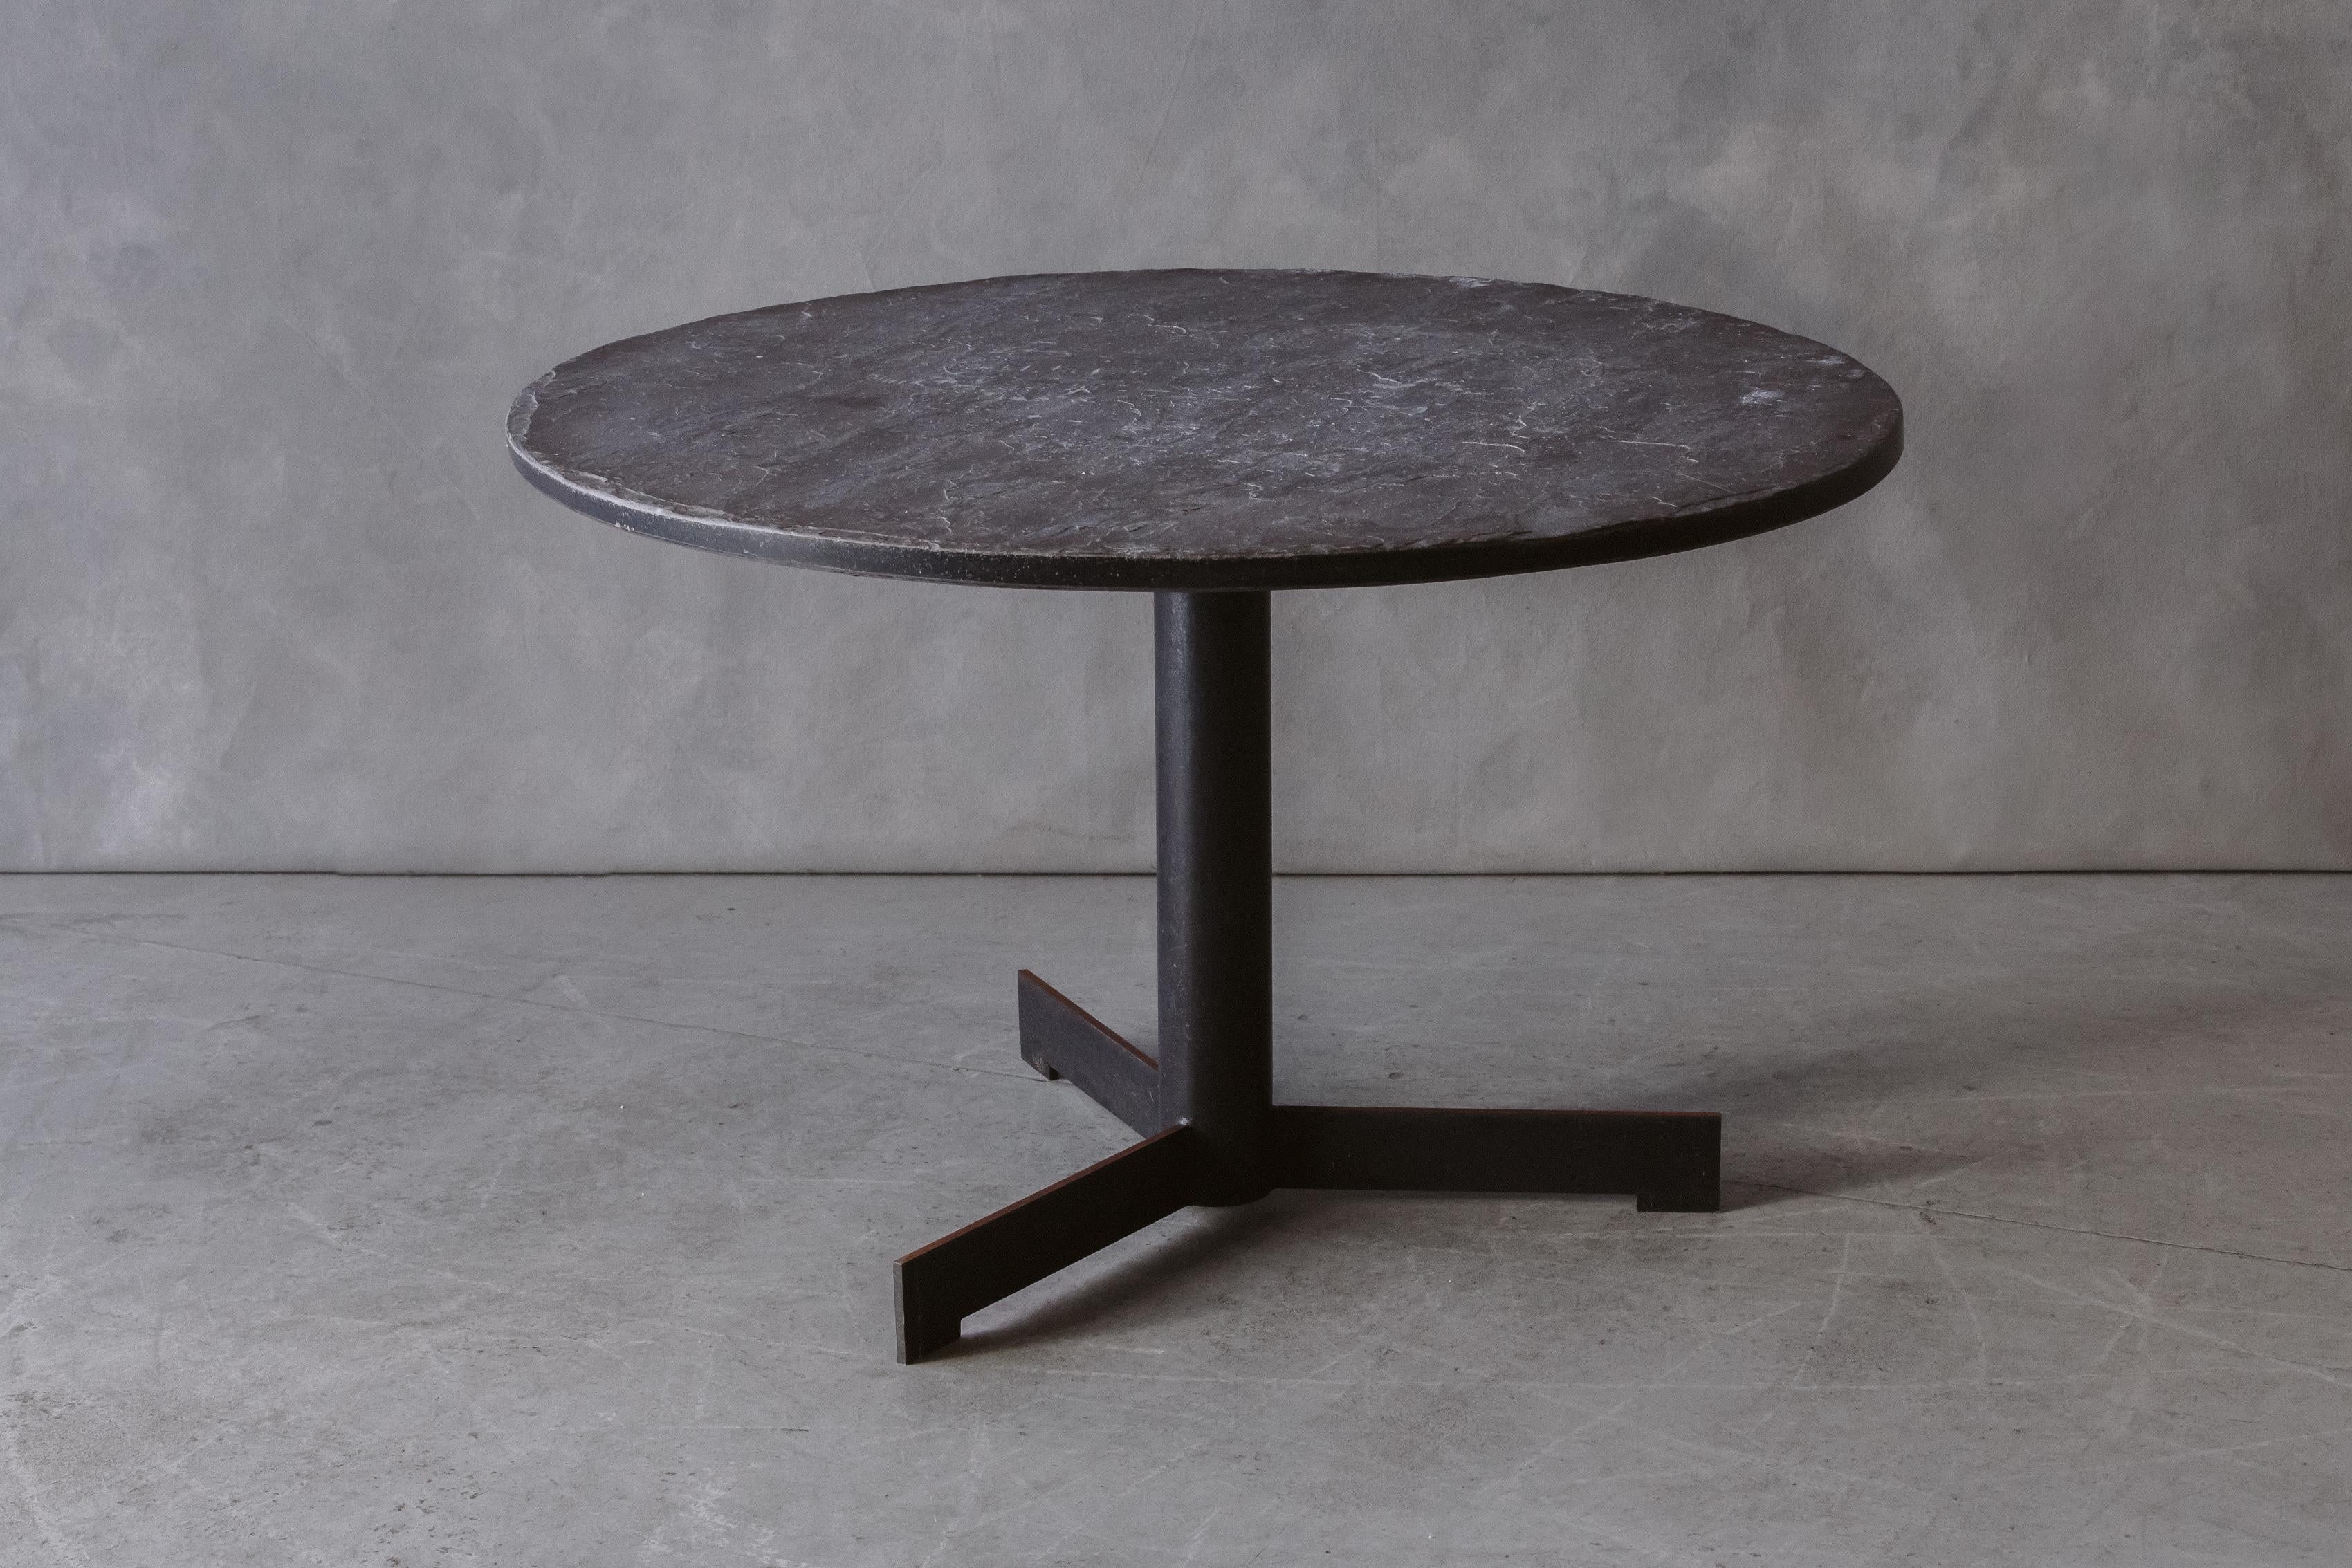 Vintage Slate Dining Table From Belgium, circa 1970s. Solid slate top on black steel base. Nice wear and use.

We prefer to speak directly with our clients. So, If you have any questions or would like to know more please give us a call or drop us